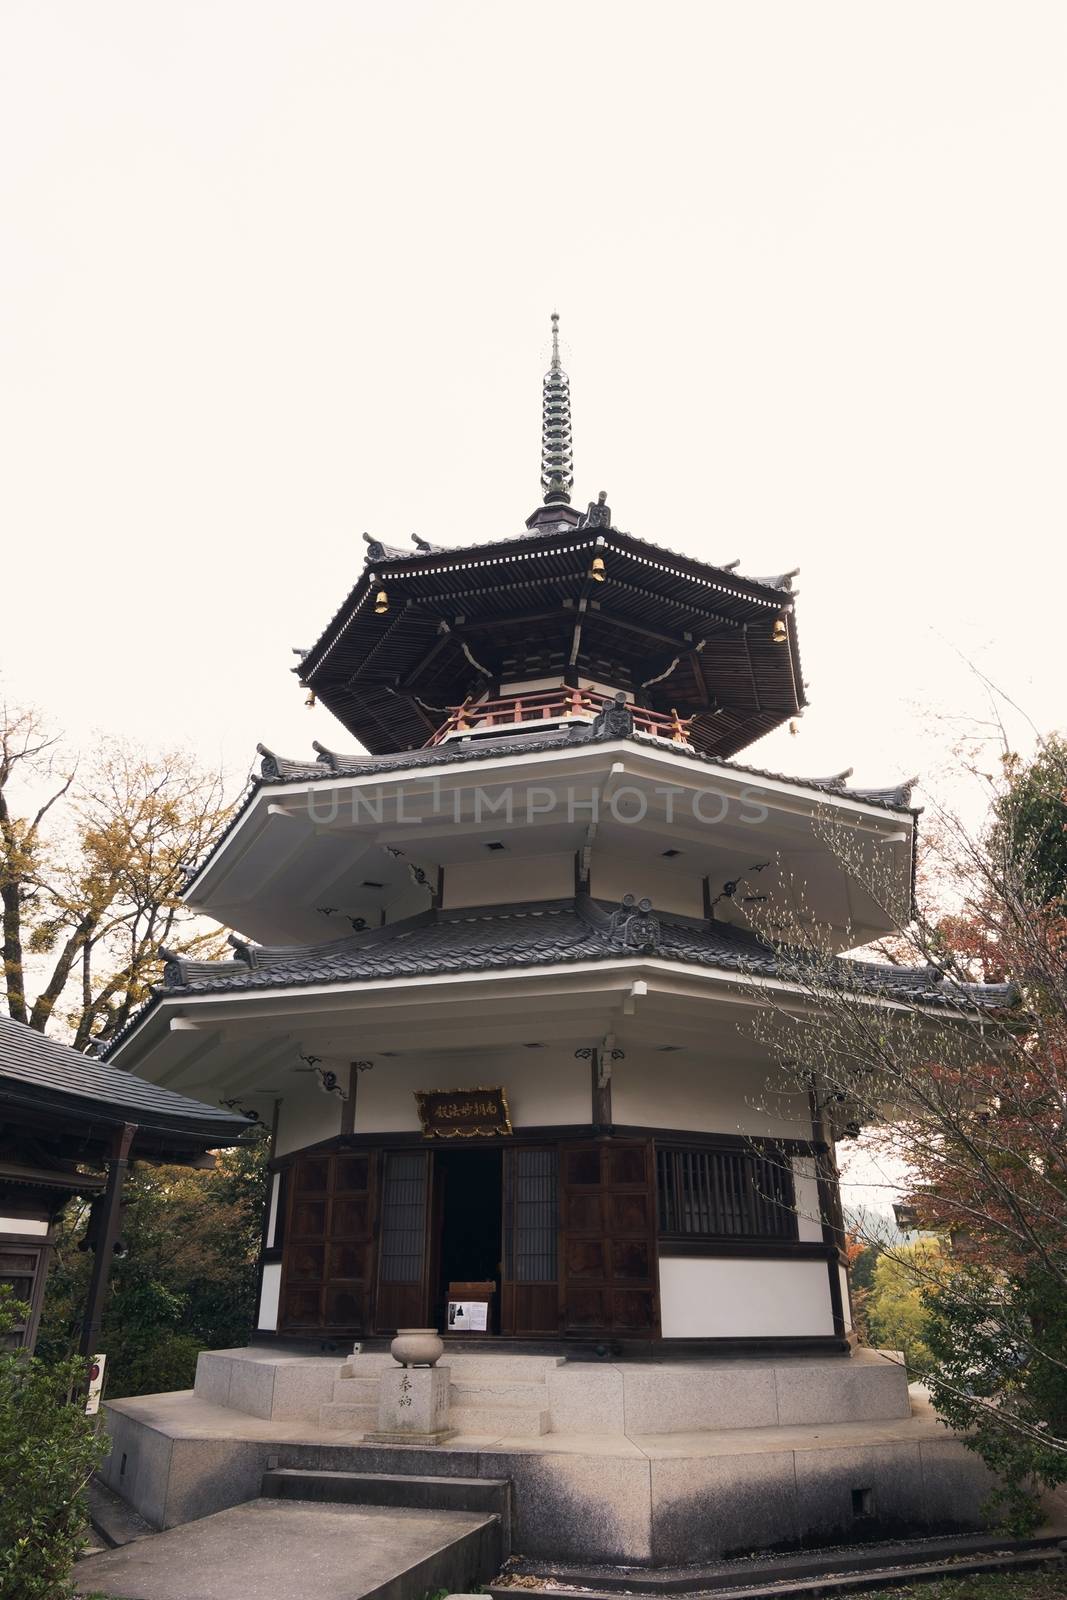 Myoho Temple with octagonal building and triple tower.